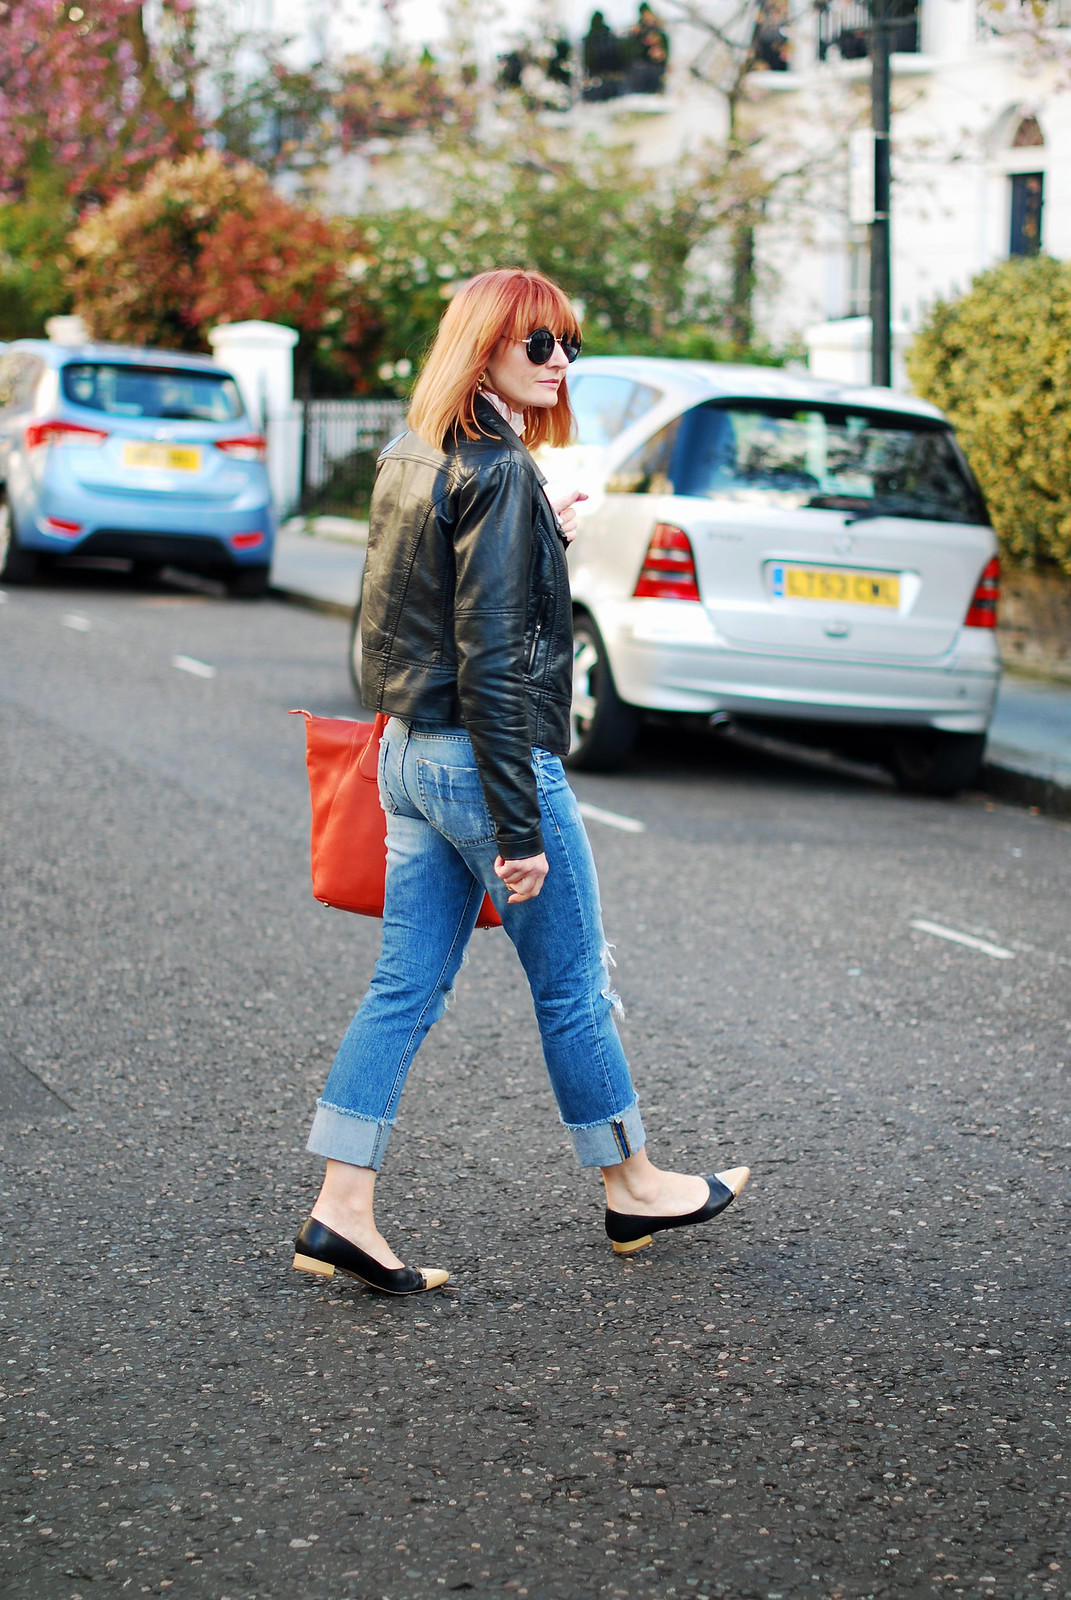 SS16 Style: M&S Archive by Alexa ruffled Harry blouse, distressed boyfriend jeans, black biker jacket, orange tote, pointed two-tone flats | Not Dressed As Lamb